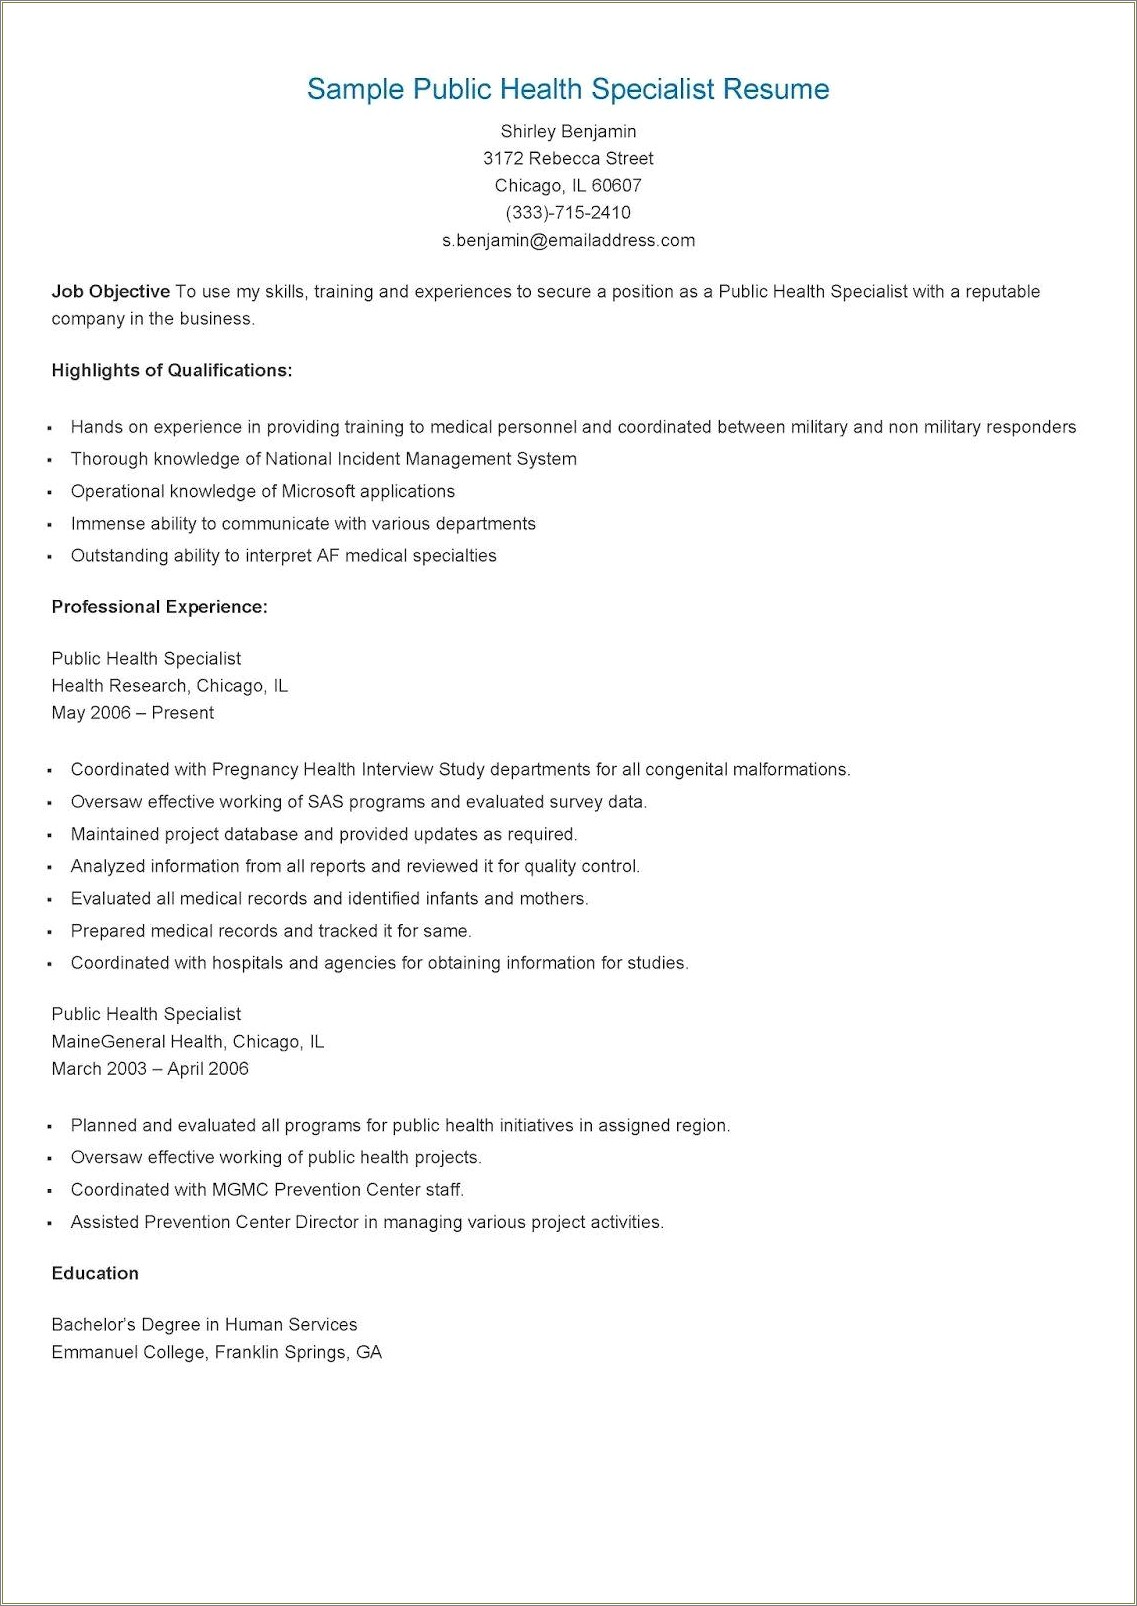 Examples Of Public Health Objectives On Resume